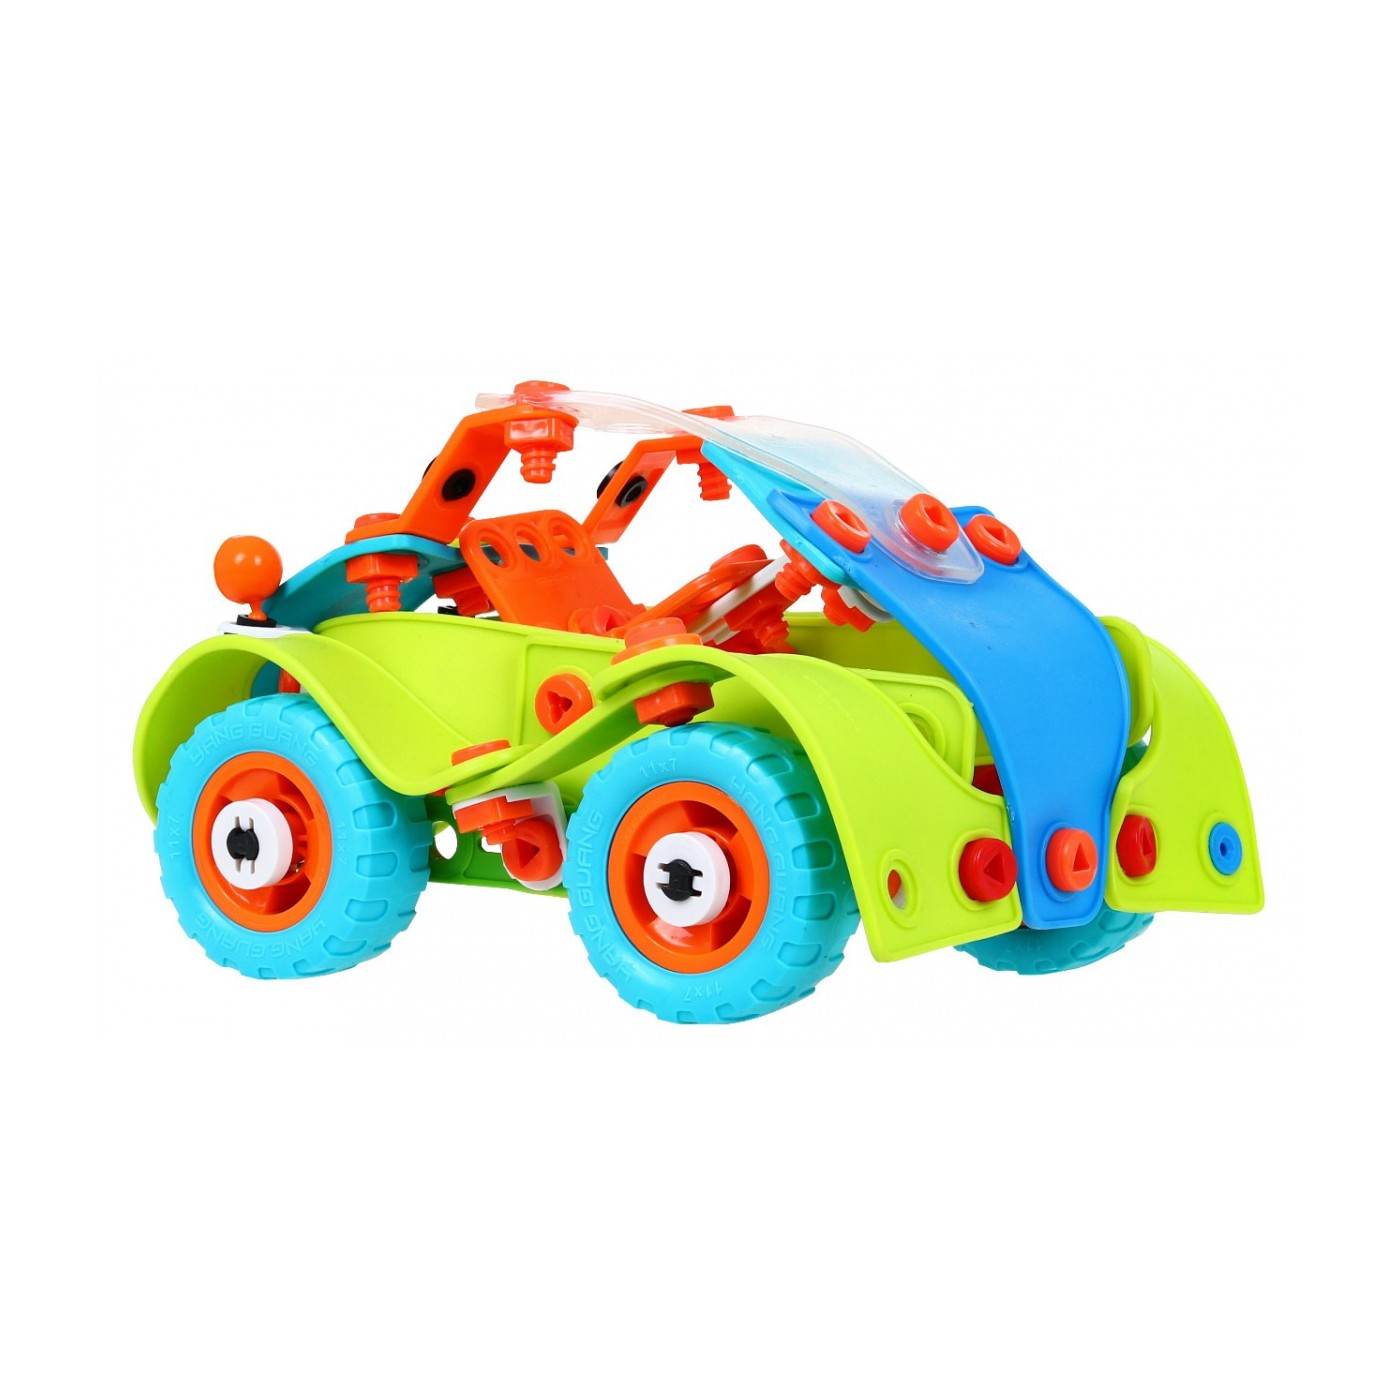 The pads Fun Vehicles 146 Items